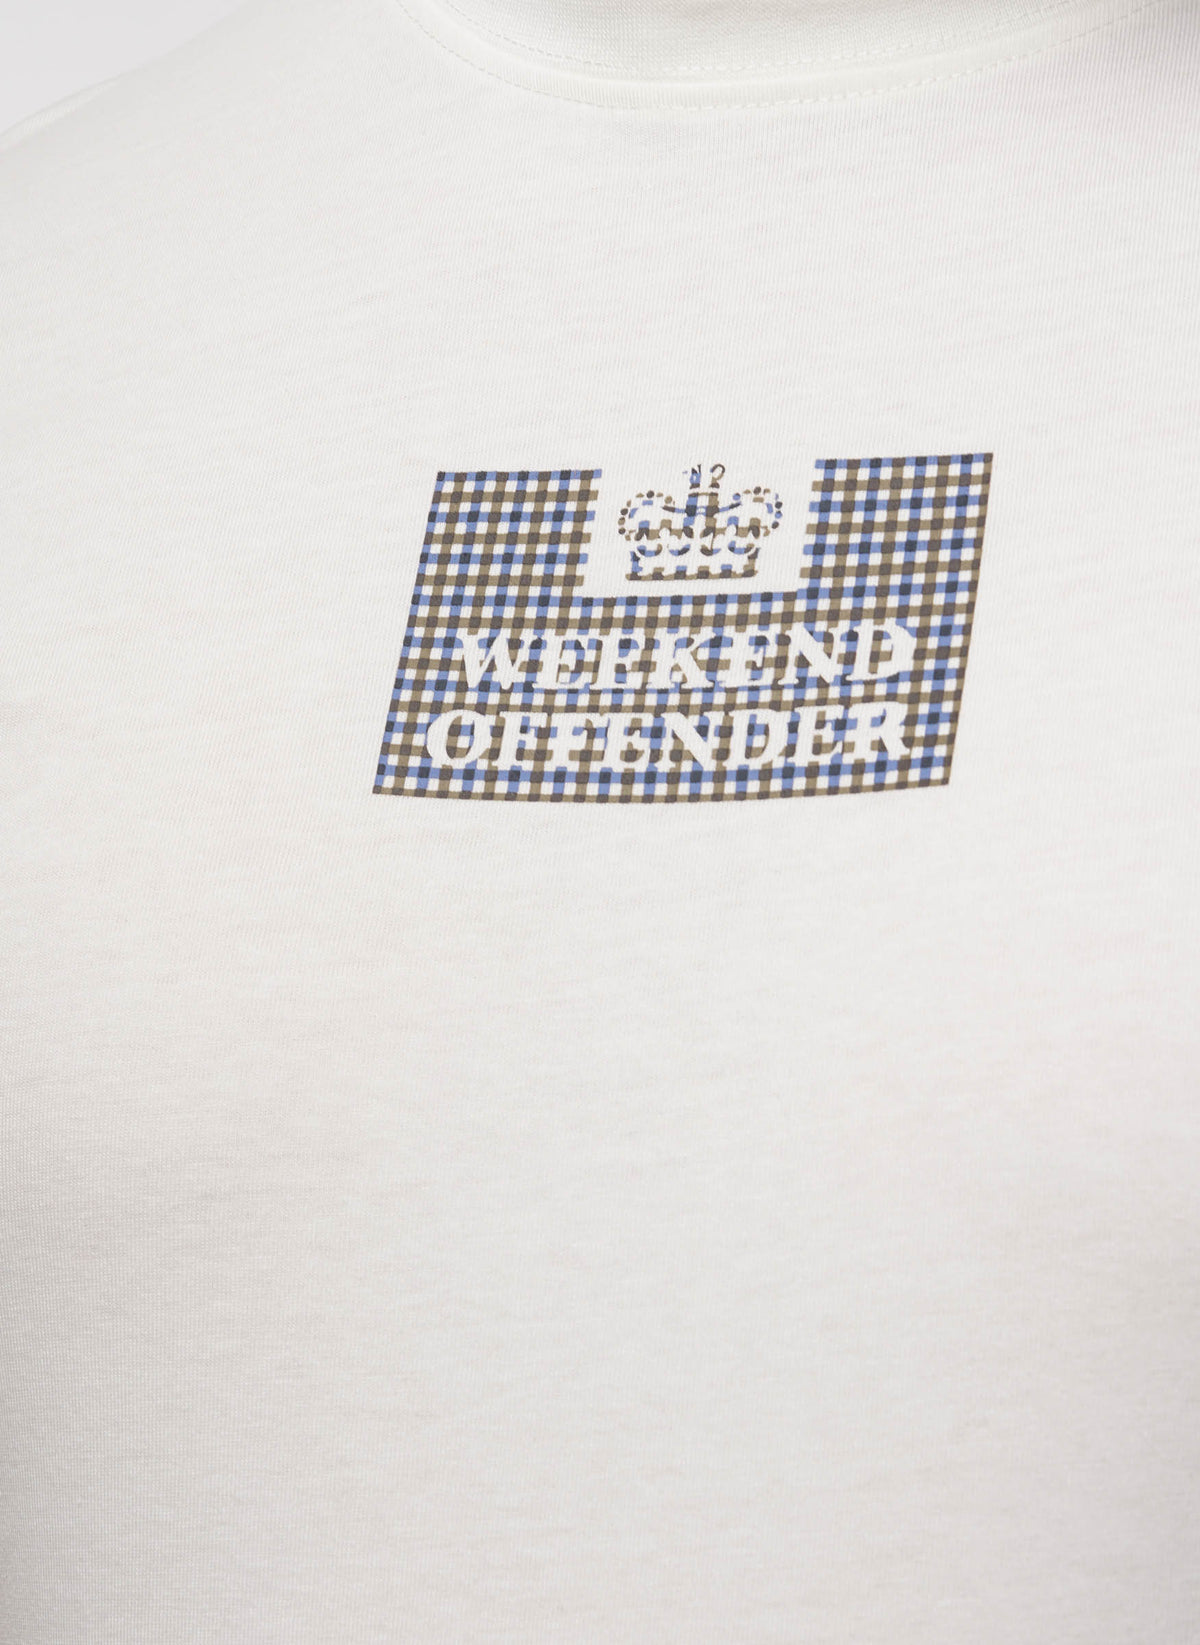 Dygas T-Shirt - Winter White/House Check